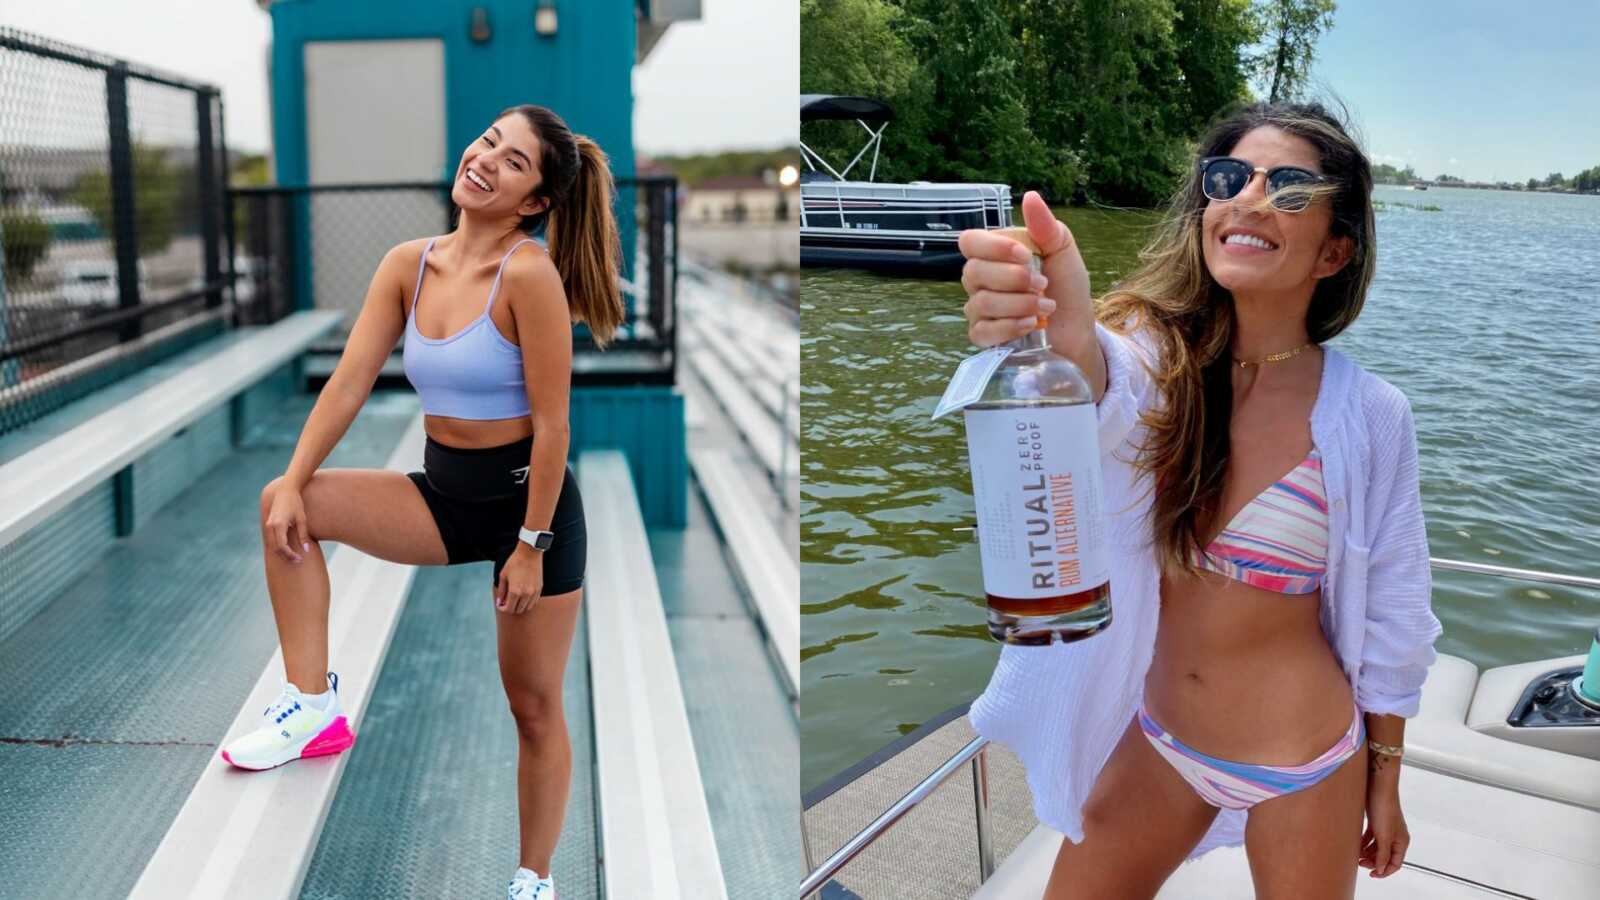 Sober young side by side photo of her working out and of her on a boat